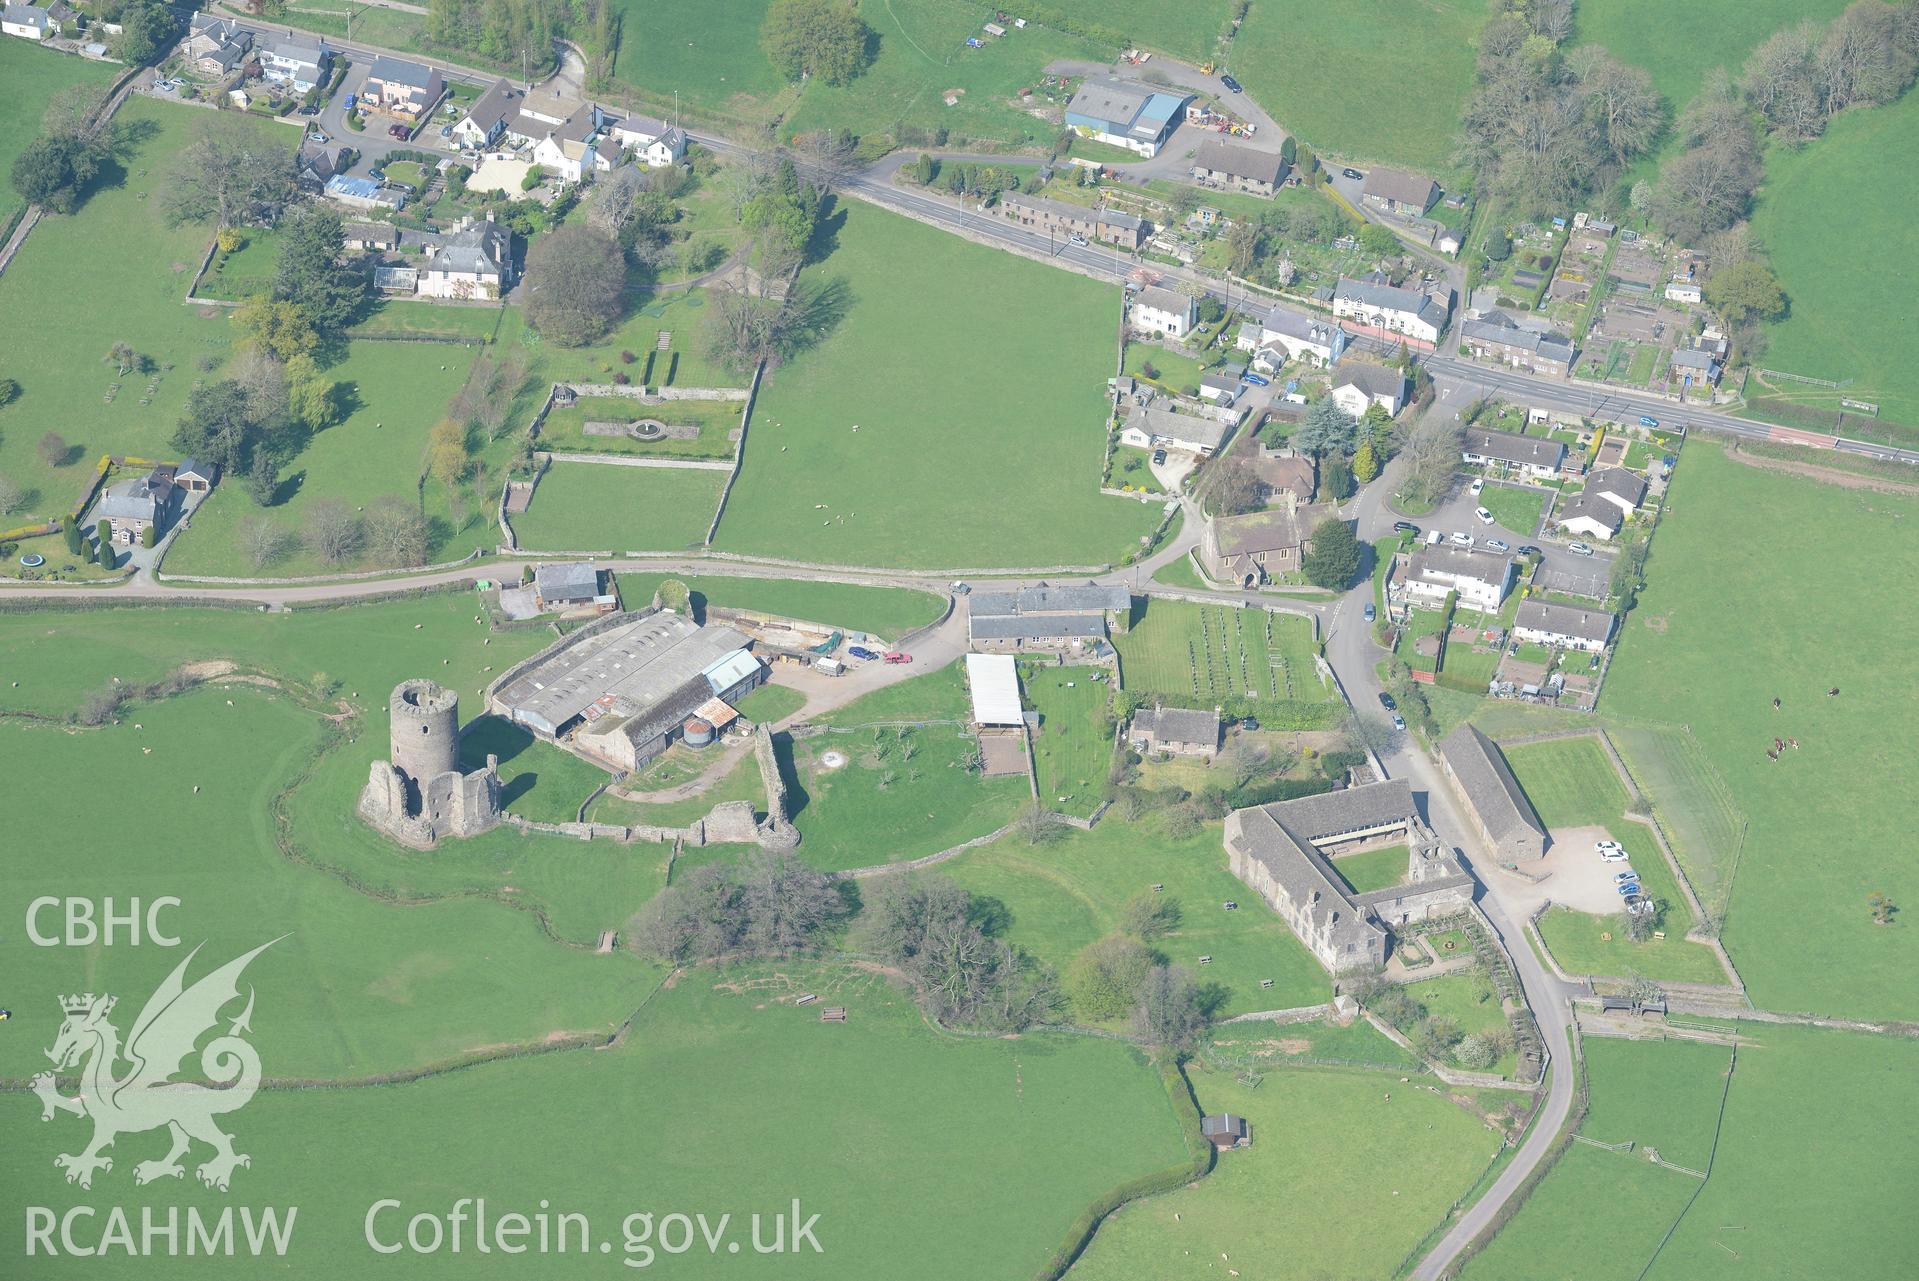 Tretower village, Tretower house and gardens, Tretower court and gardens; Tretower castle, St John's Church, Ty Llys farm and Tretower Shrunken settlement. Oblique aerial photograph taken during the Royal Commission's programme of archaeological aerial reconnaissance by Toby Driver on 21st April 2015